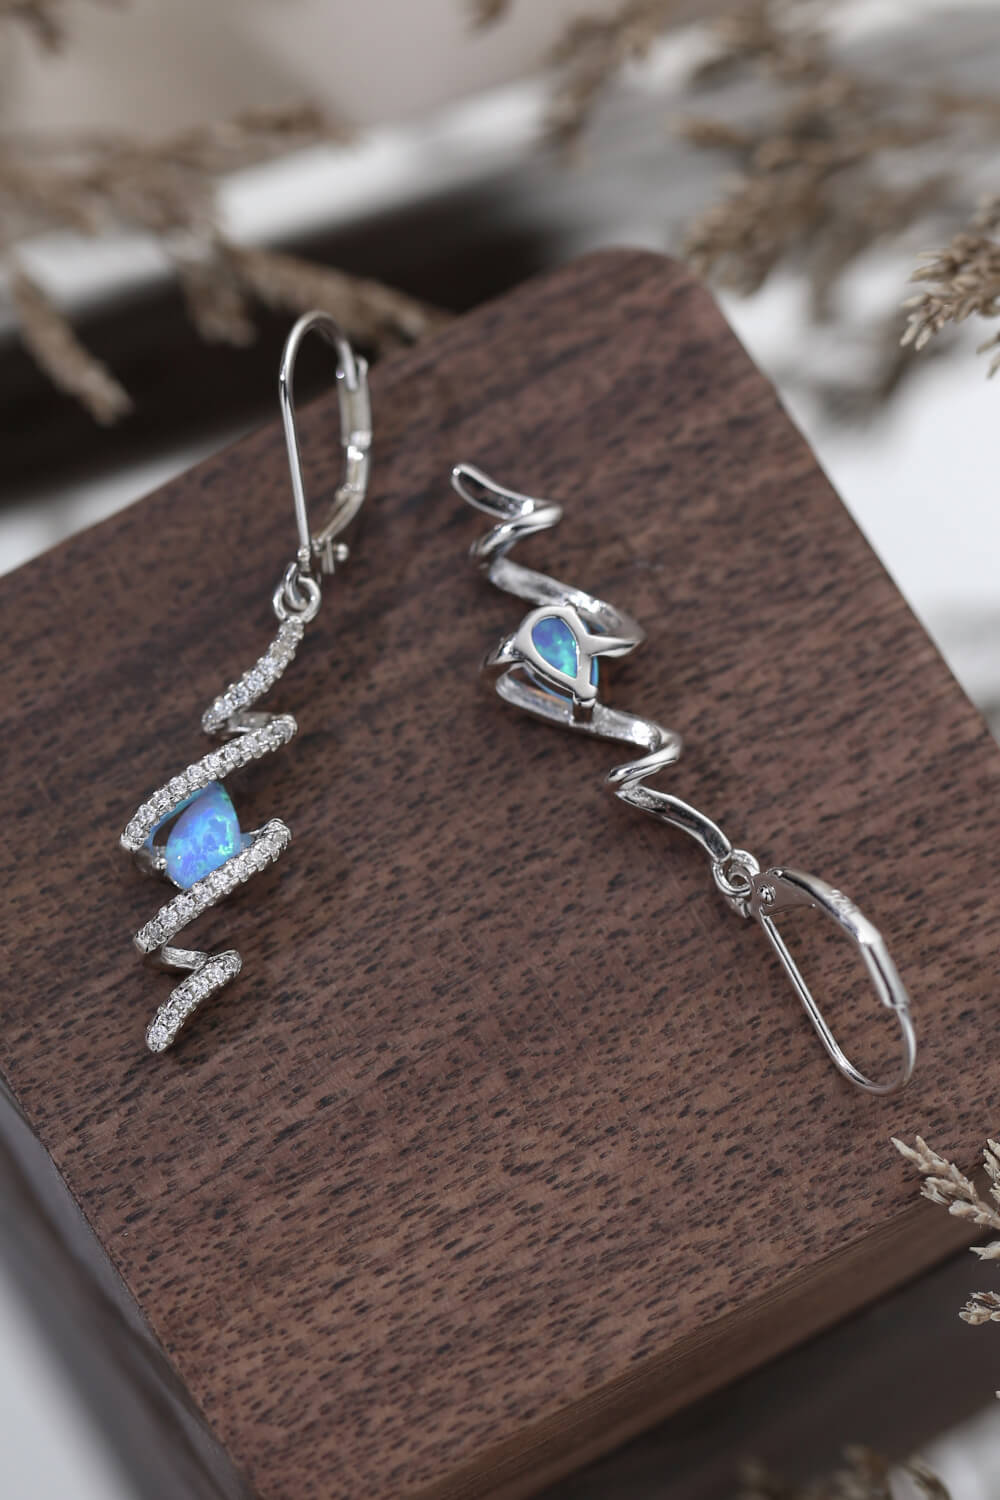 Twisted Opal Drop Earrings - Enchanting Drops of Ethereal Beauty - Elevate Your Look with Timeless Romance - Guy Christopher 